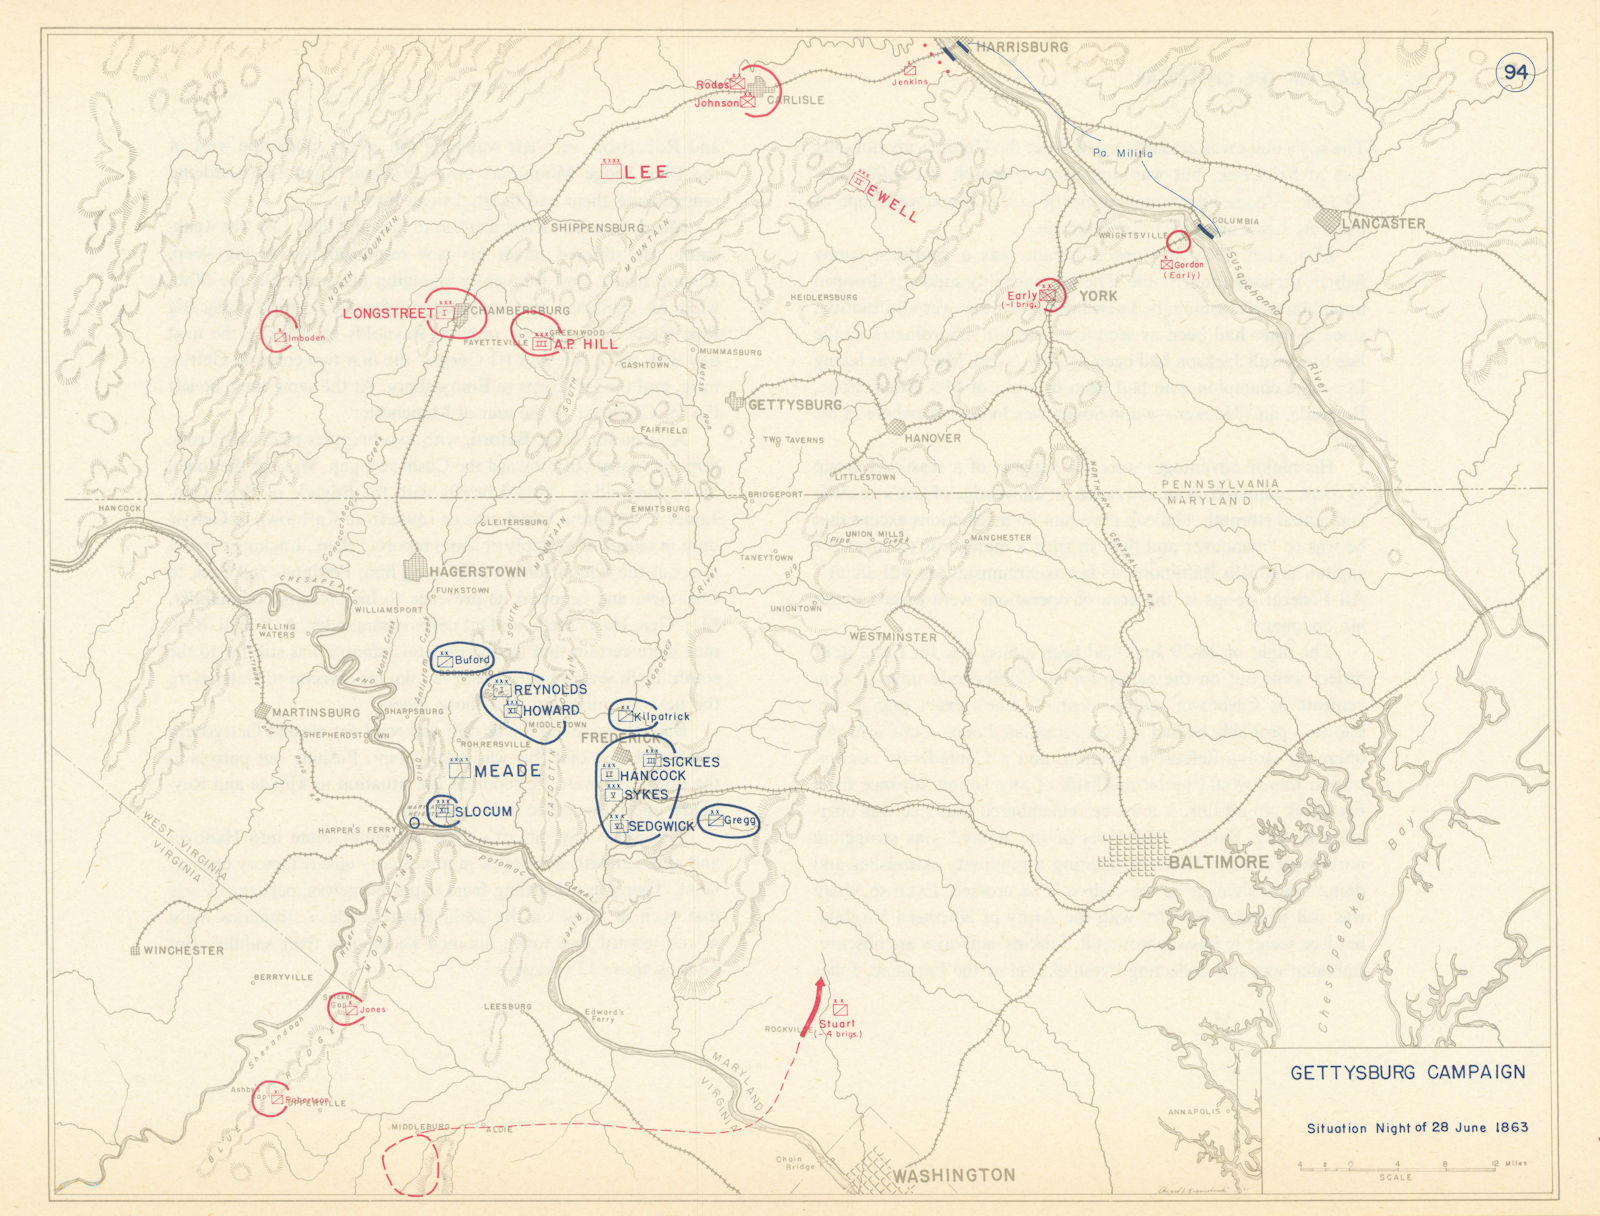 Associate Product American Civil War. Situation Night of 28 June 1863 Gettysburg Campaign 1959 map